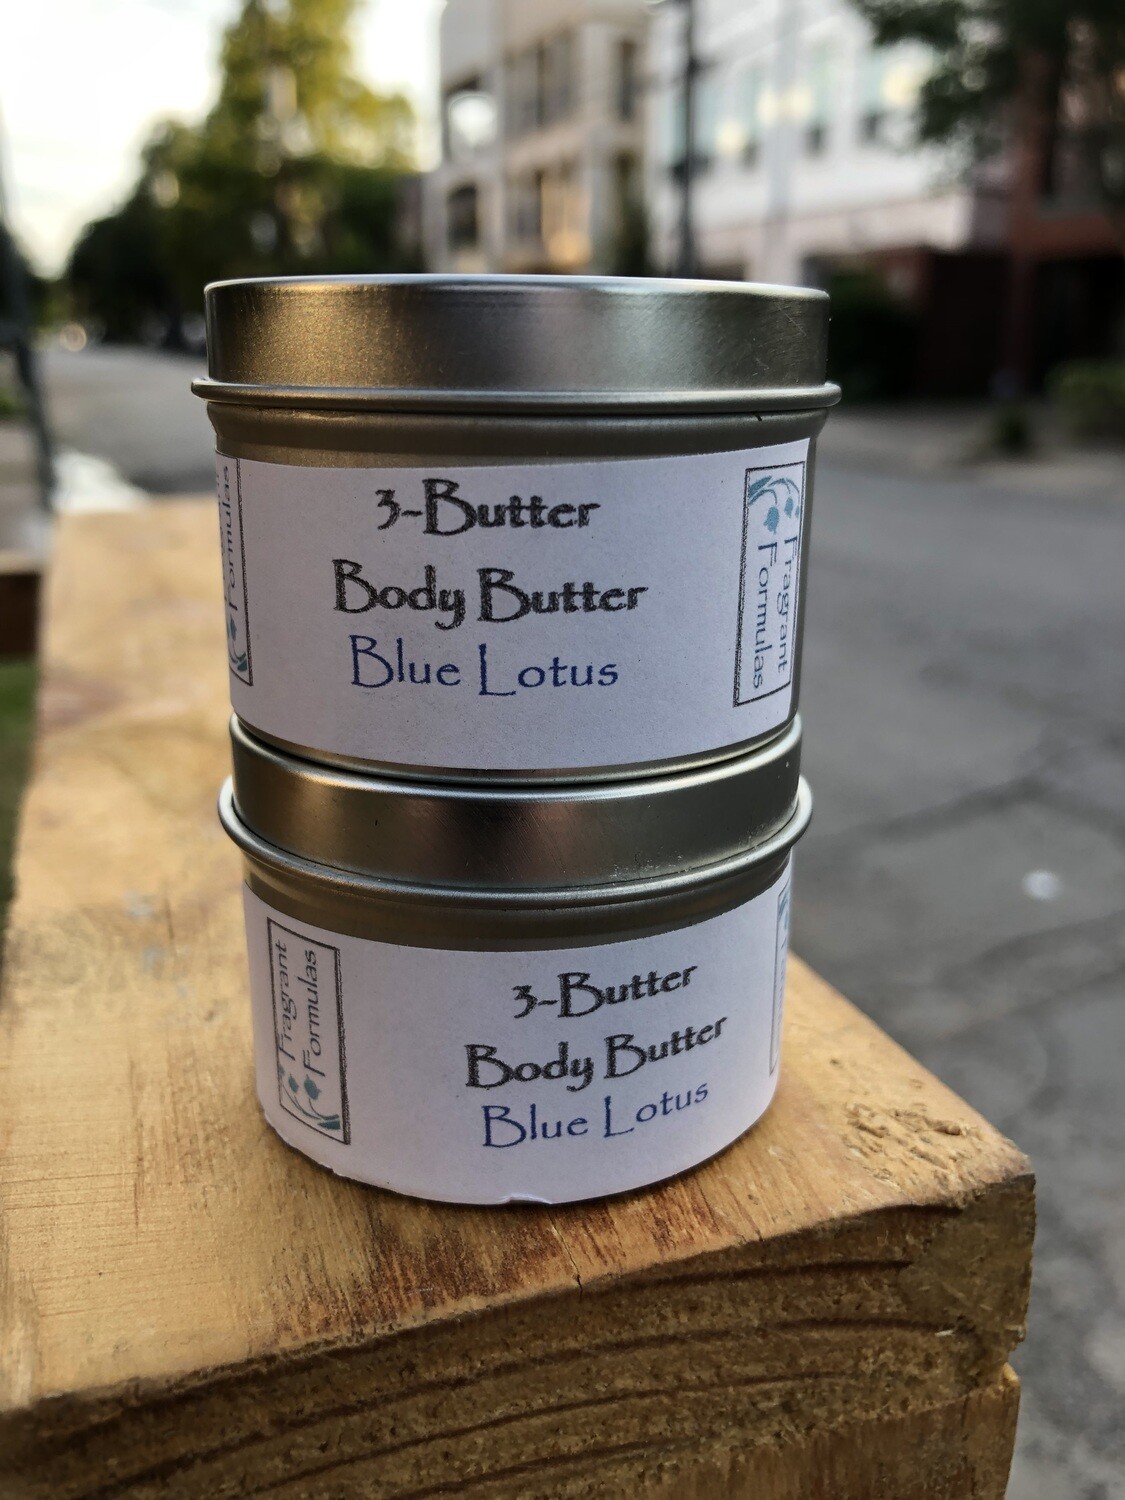 3-Butter Body Butter, Blue Lotus Scent, 1.6 ounce